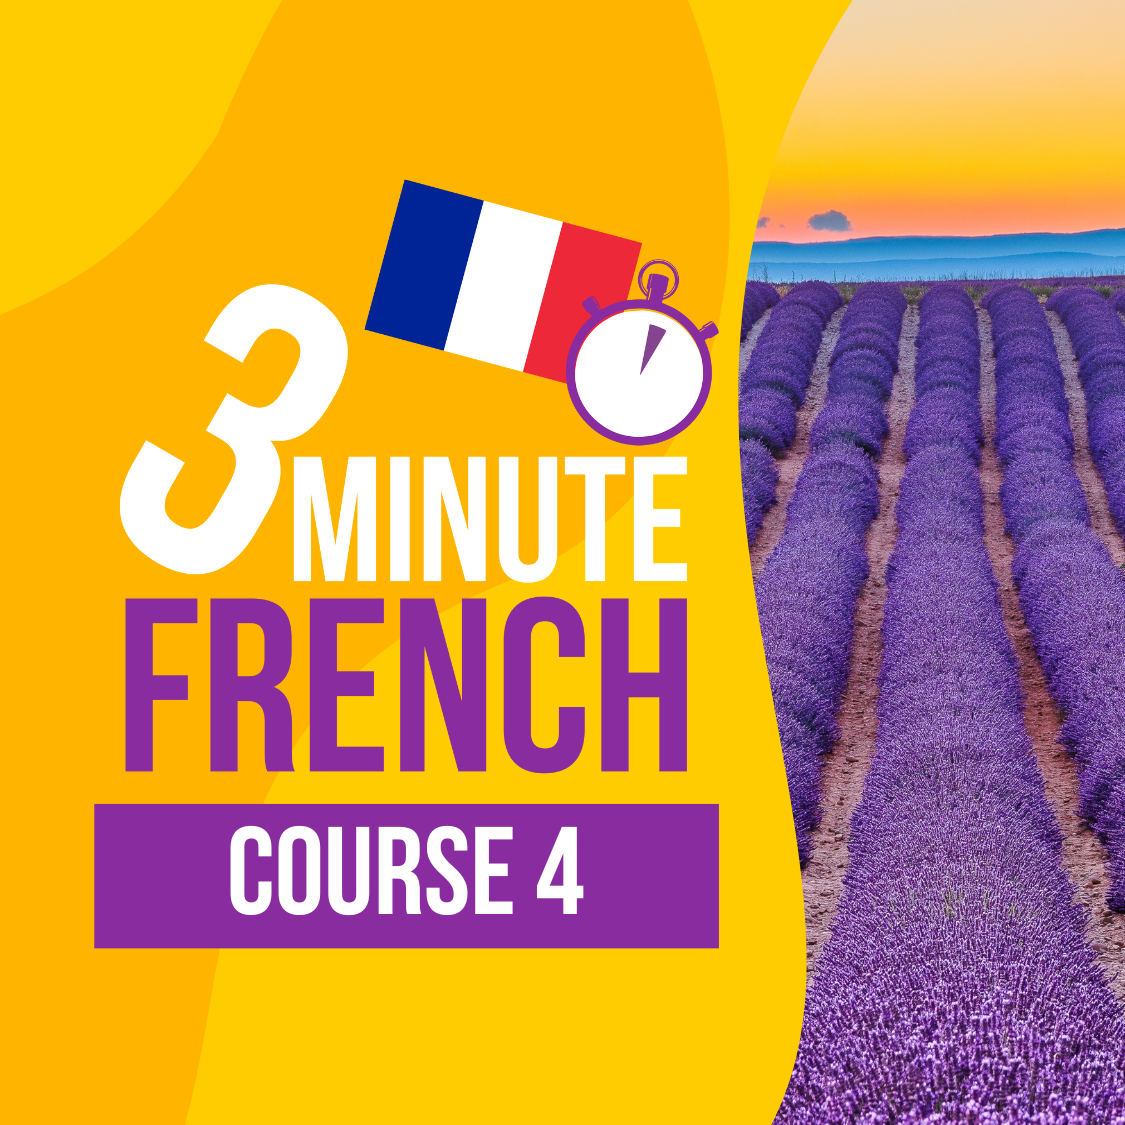 3 Minute French - Course 4